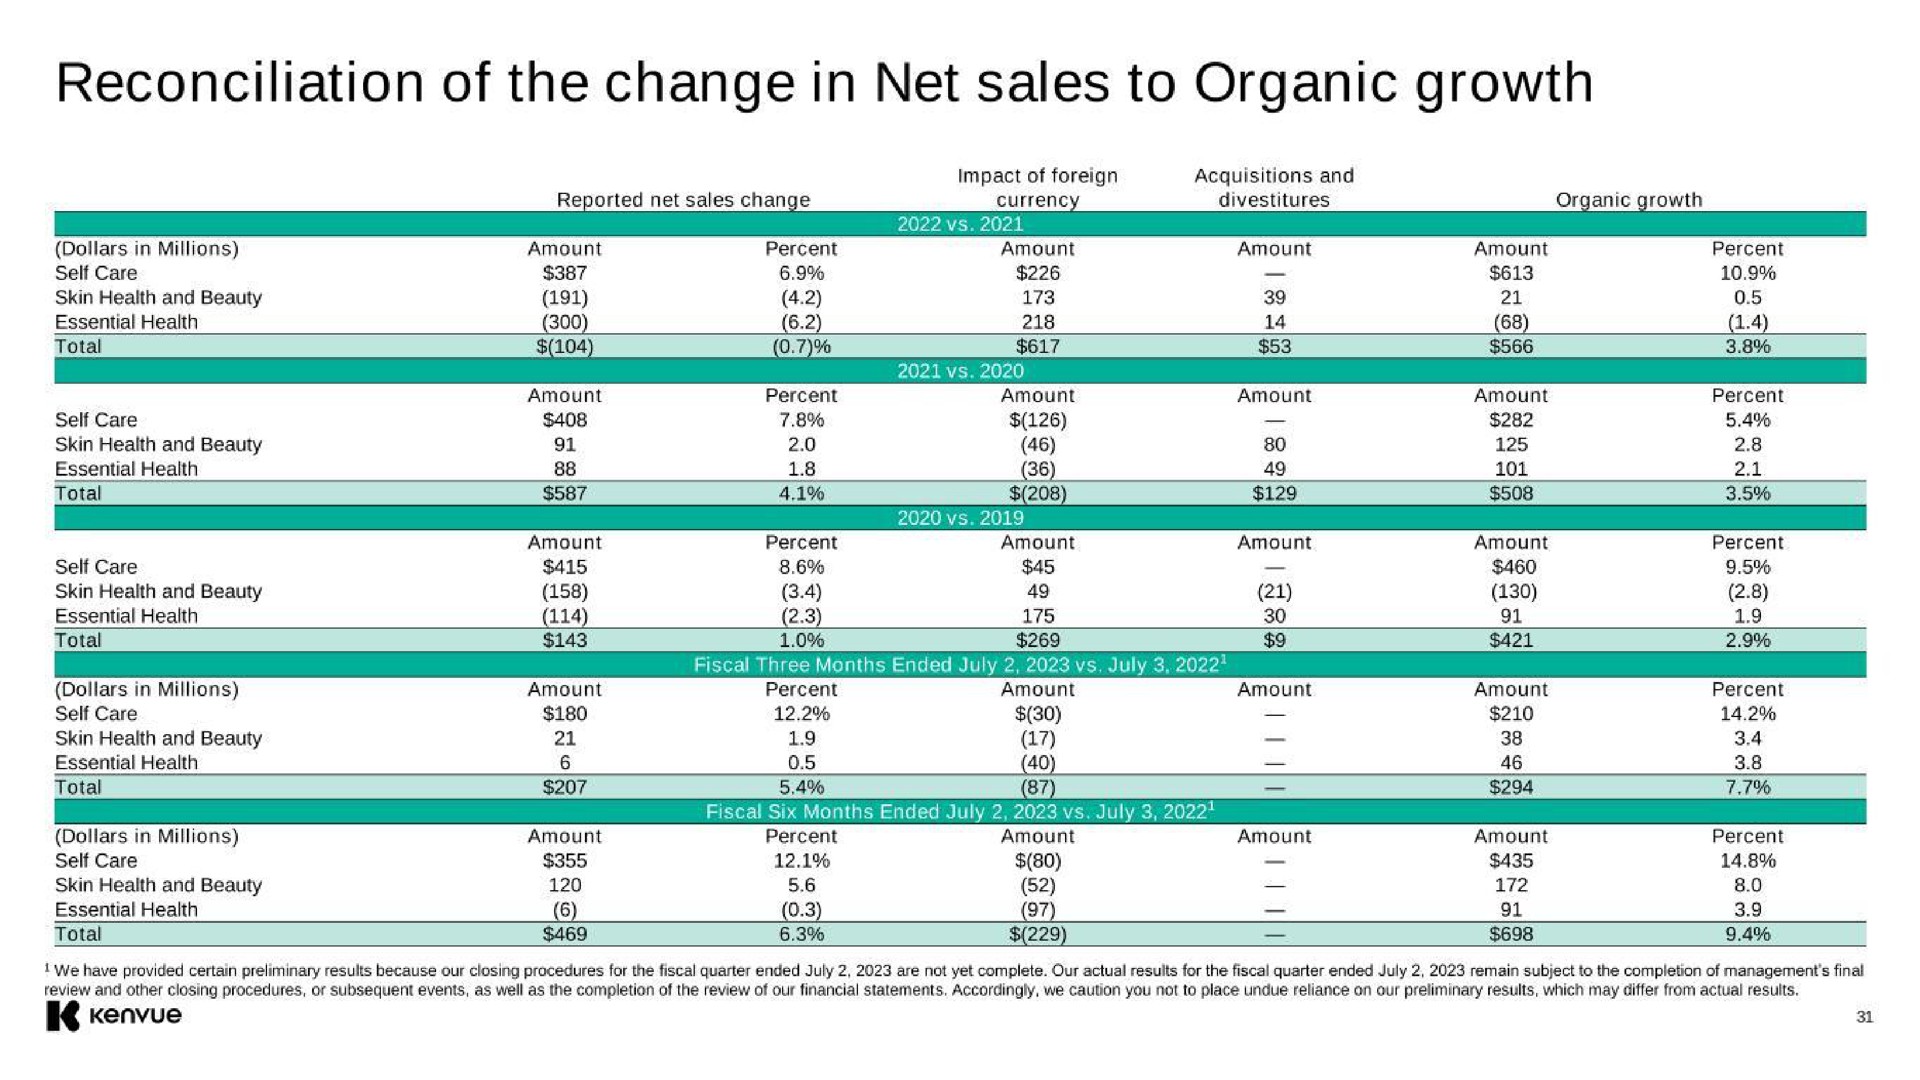 reconciliation of the change in net sales to organic growth | Kenvue